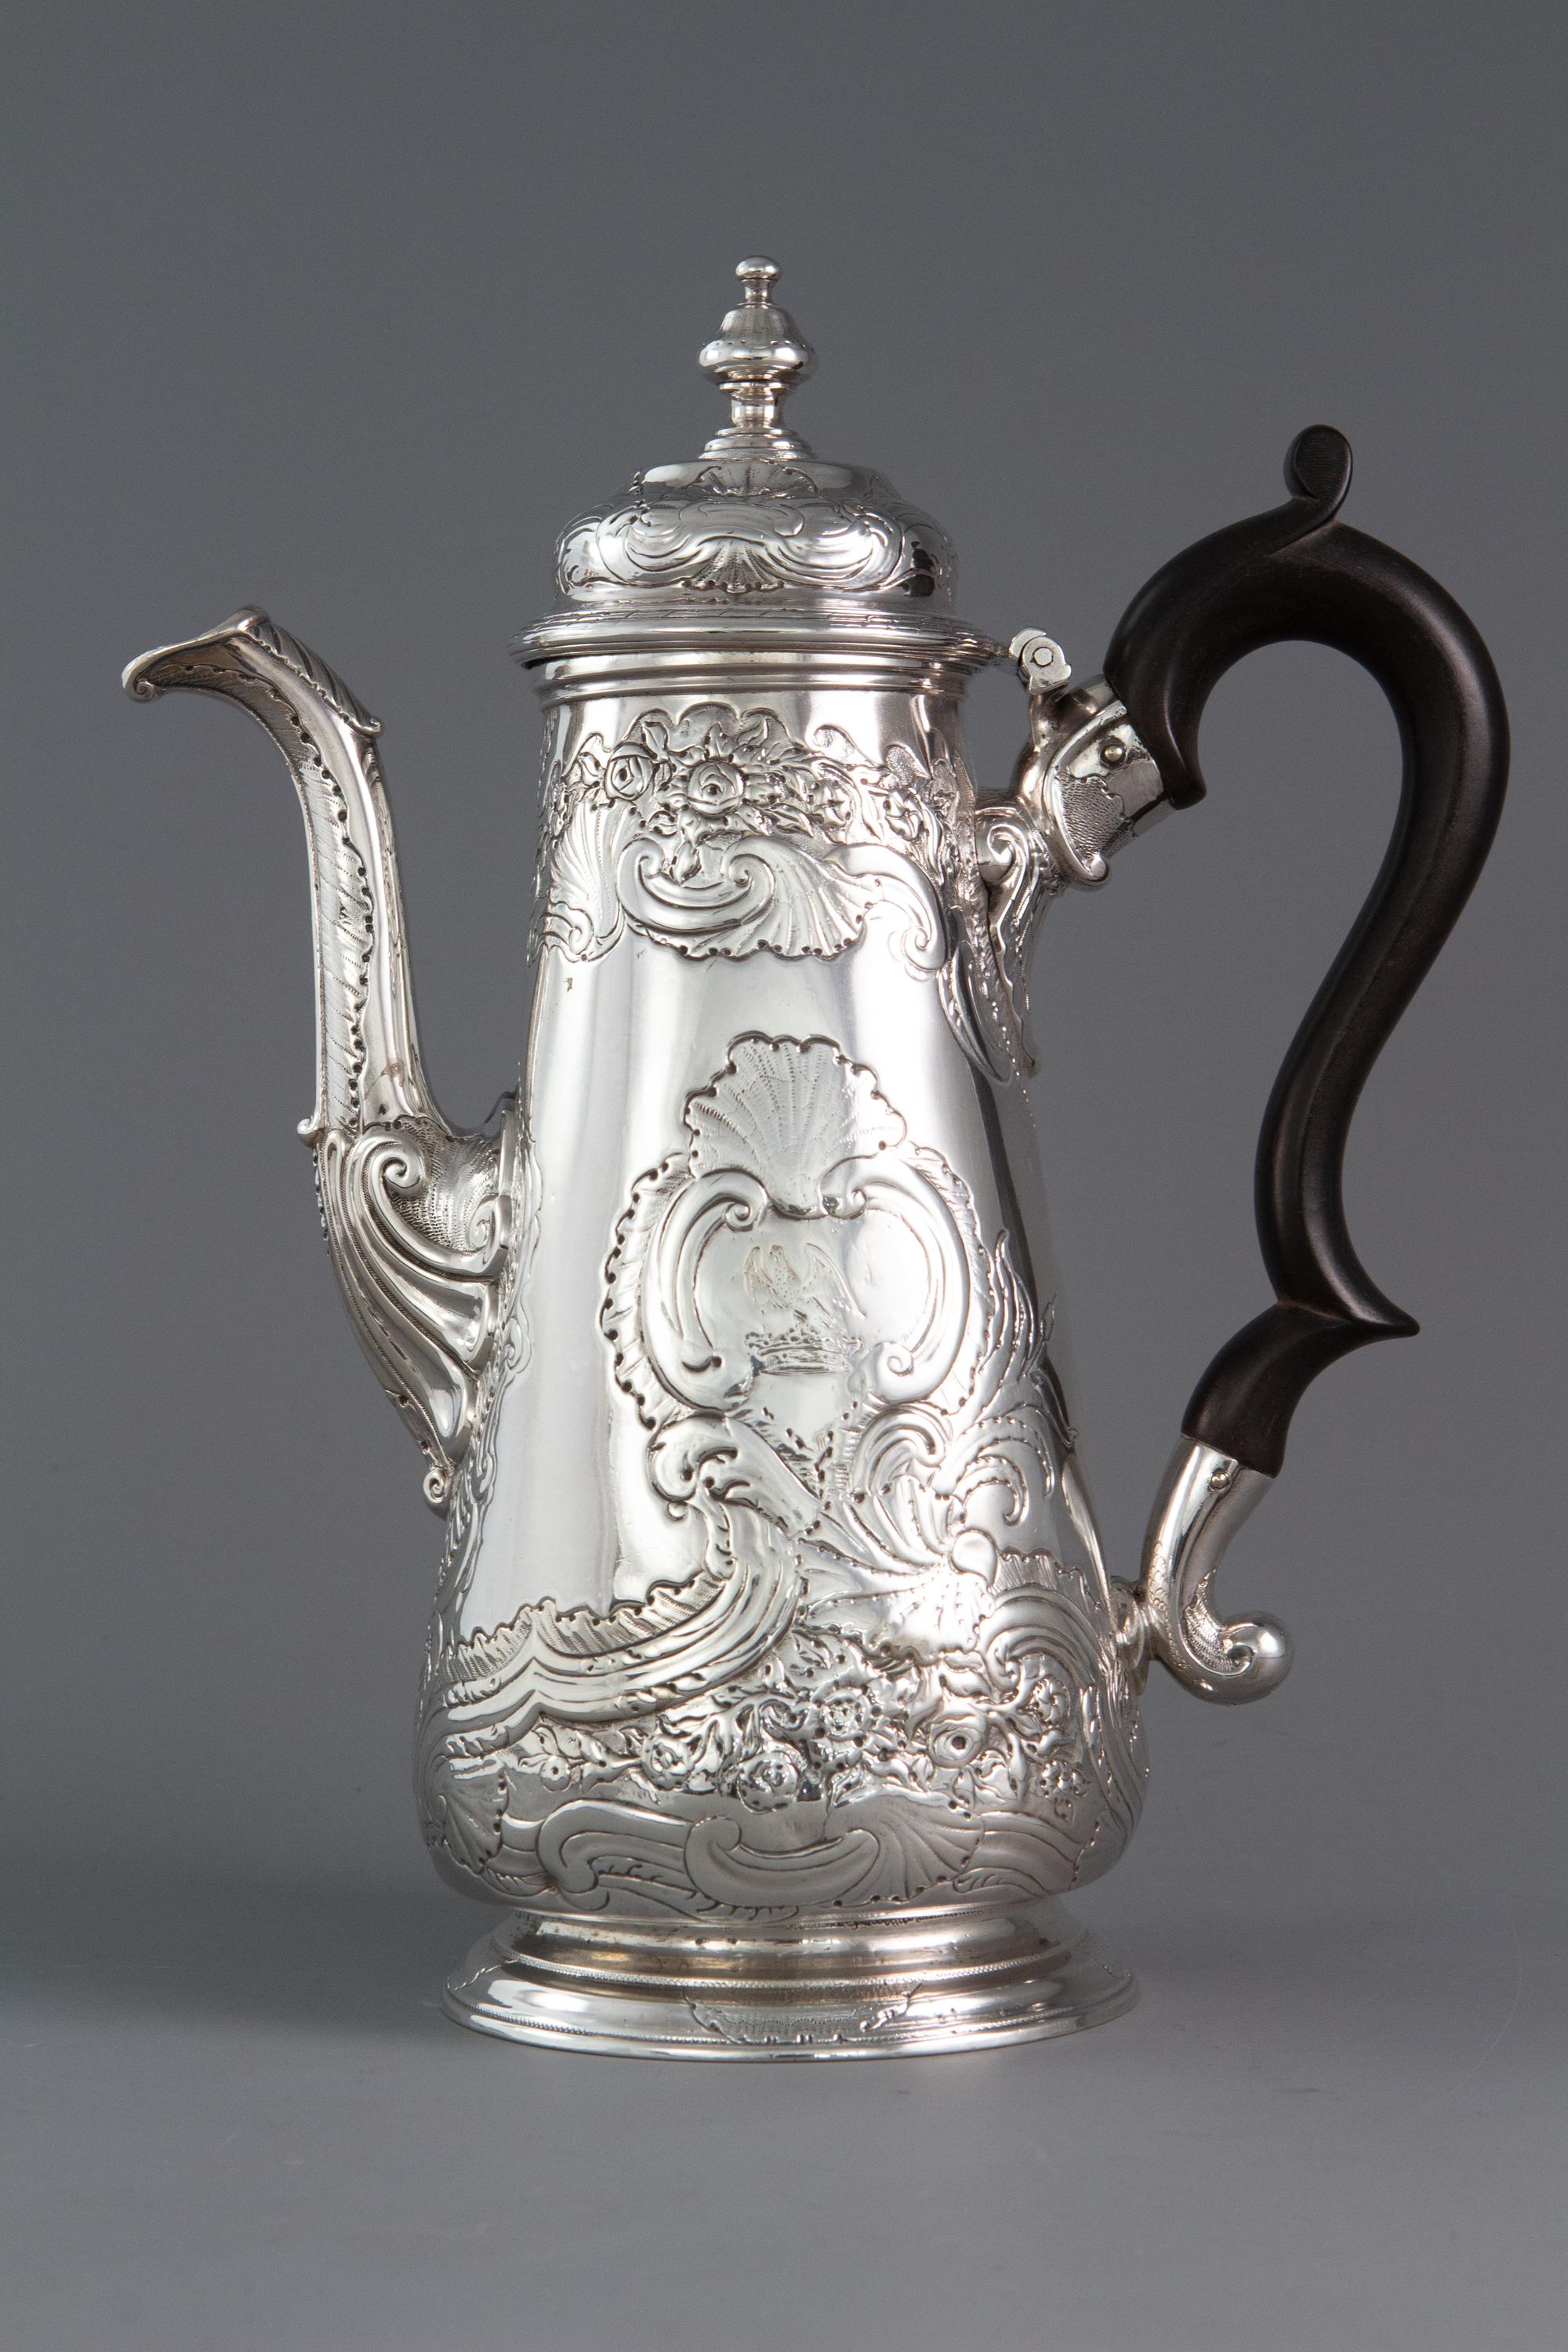 A George II silver coffee pot London 1738 by Christian Hillan

An early Georgian silver coffee pot of baluster form decorated with shell and scroll design with floral motifs. The stepped dome lid with an acorn finial. The leaf-capped swan neck